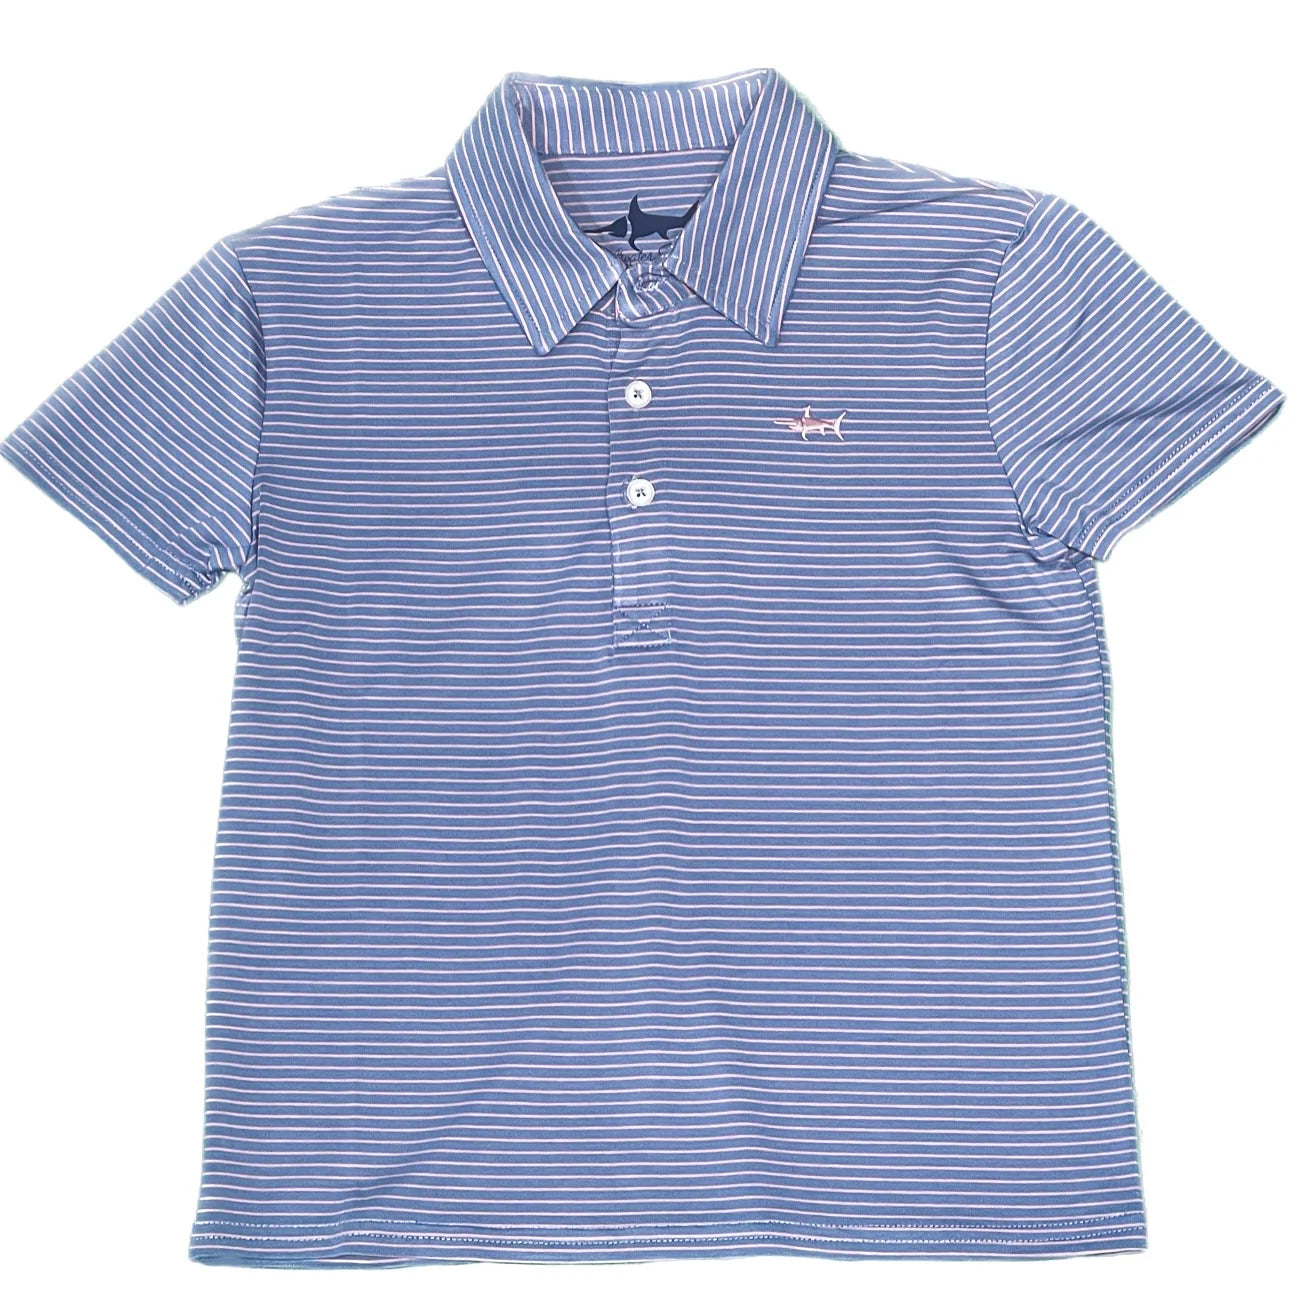 Banks Performance Polo in Blue/Pink Stripe